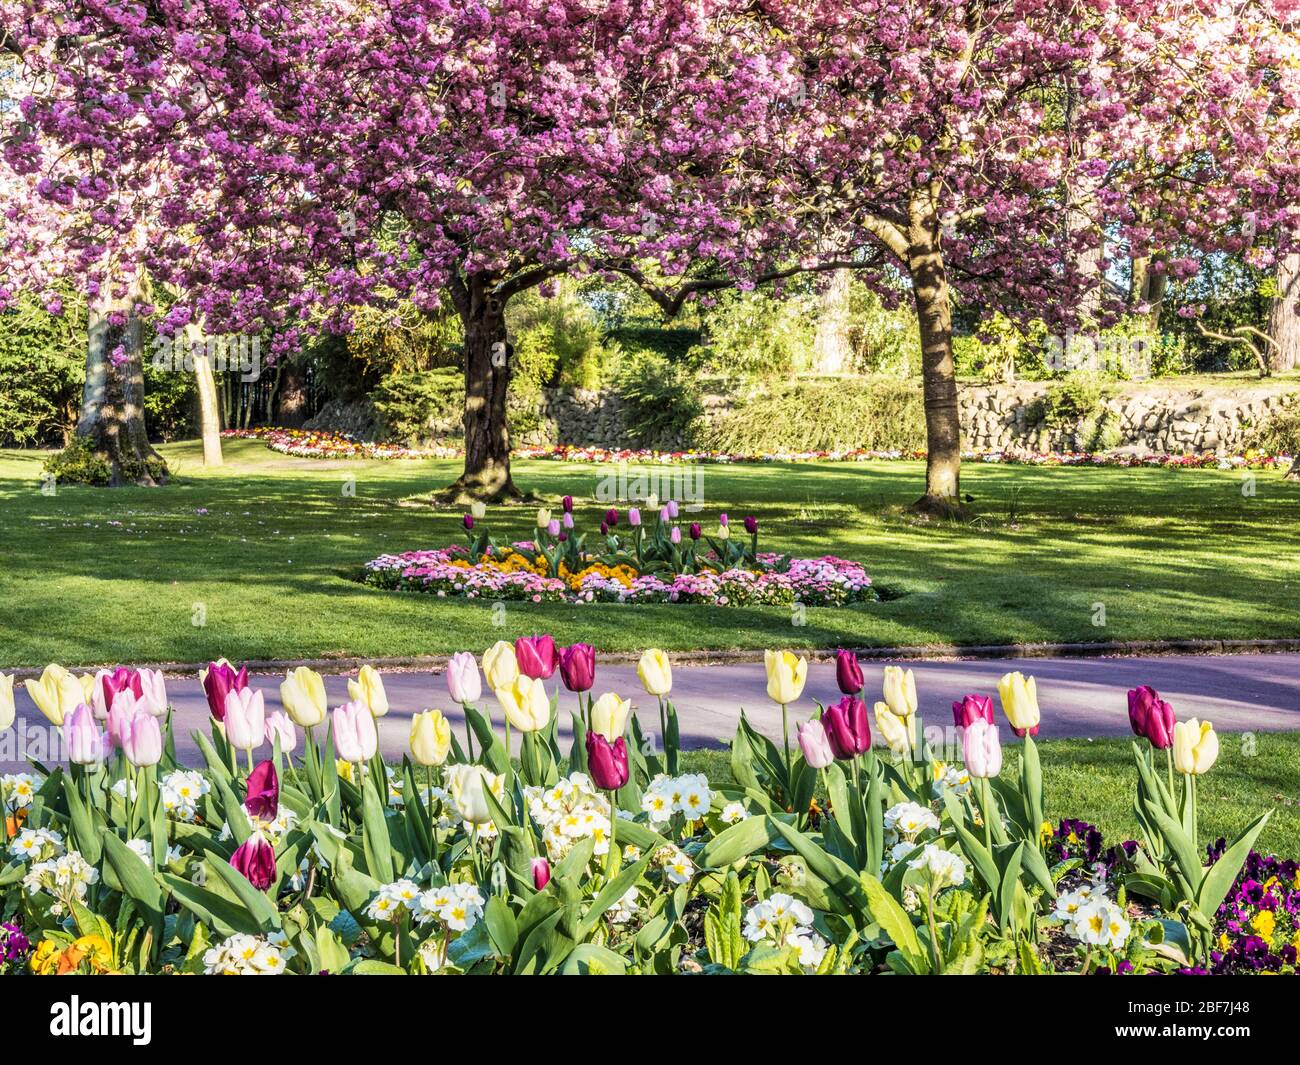 A bed of tulips, white primulas and pansies with flowering pink cherry trees in the background in an urban public park in England. Stock Photo